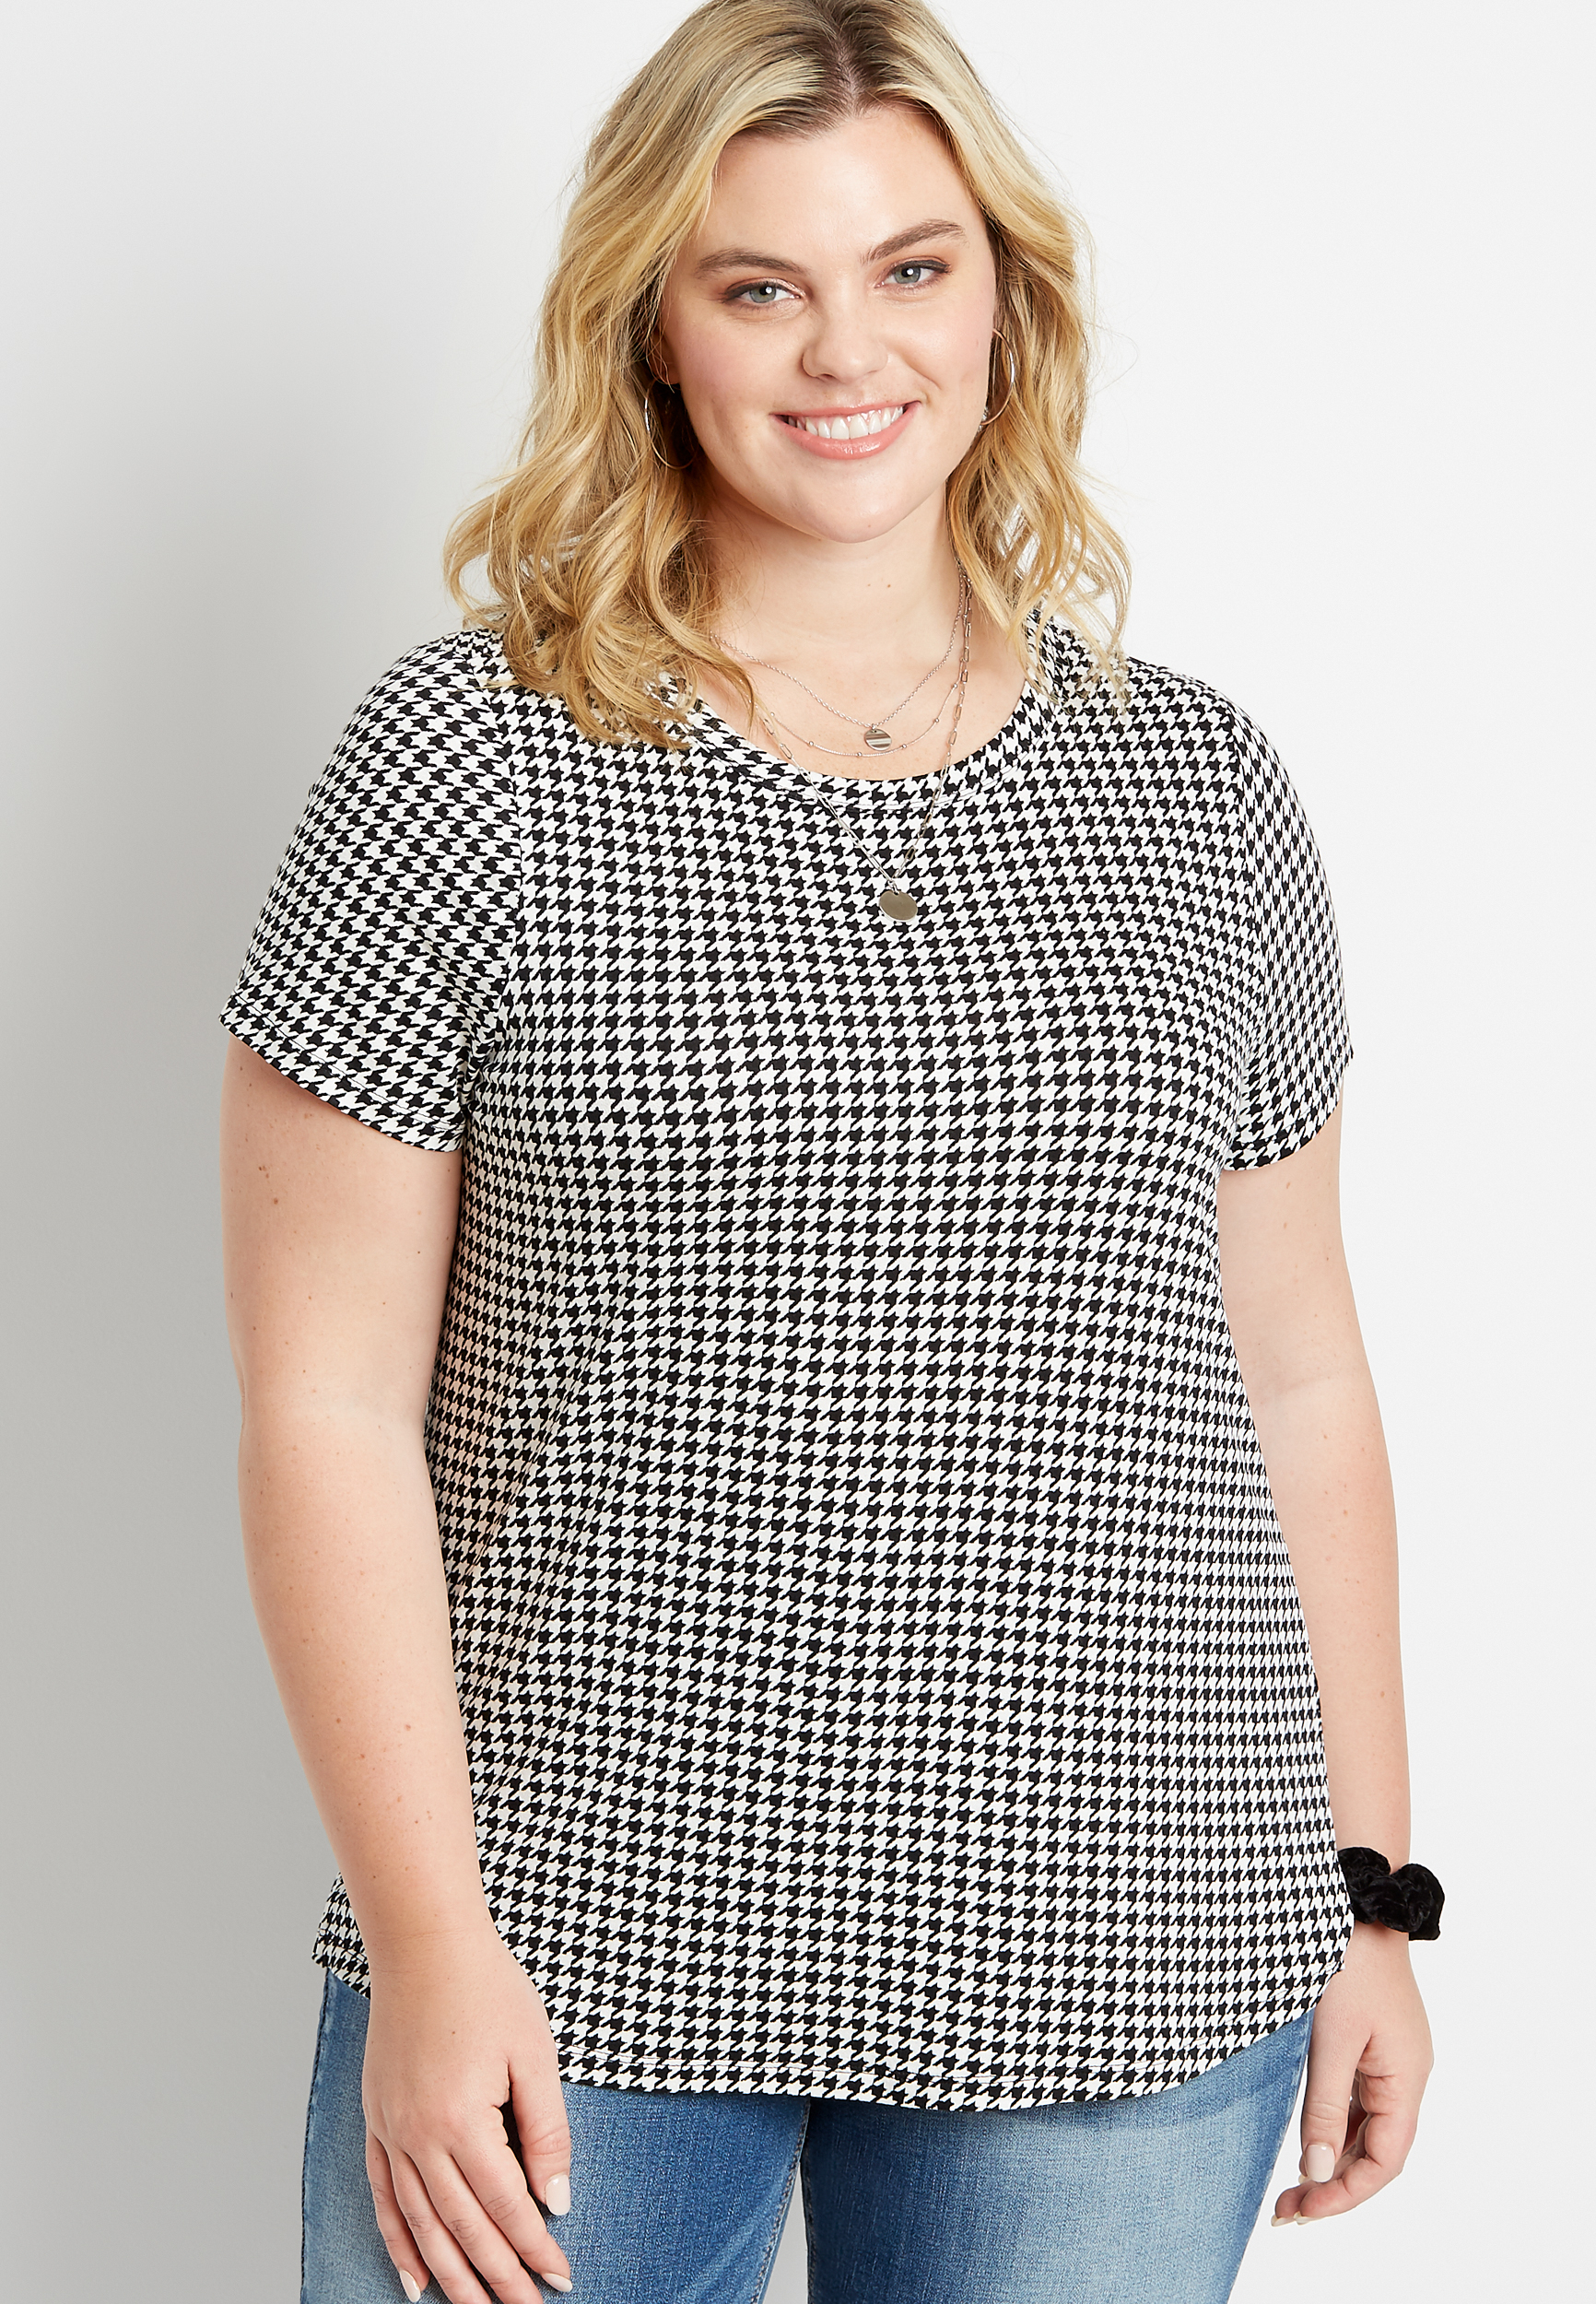 Plus Size 24/7 Black Houndstooth Crew Neck Classic Tee | maurices